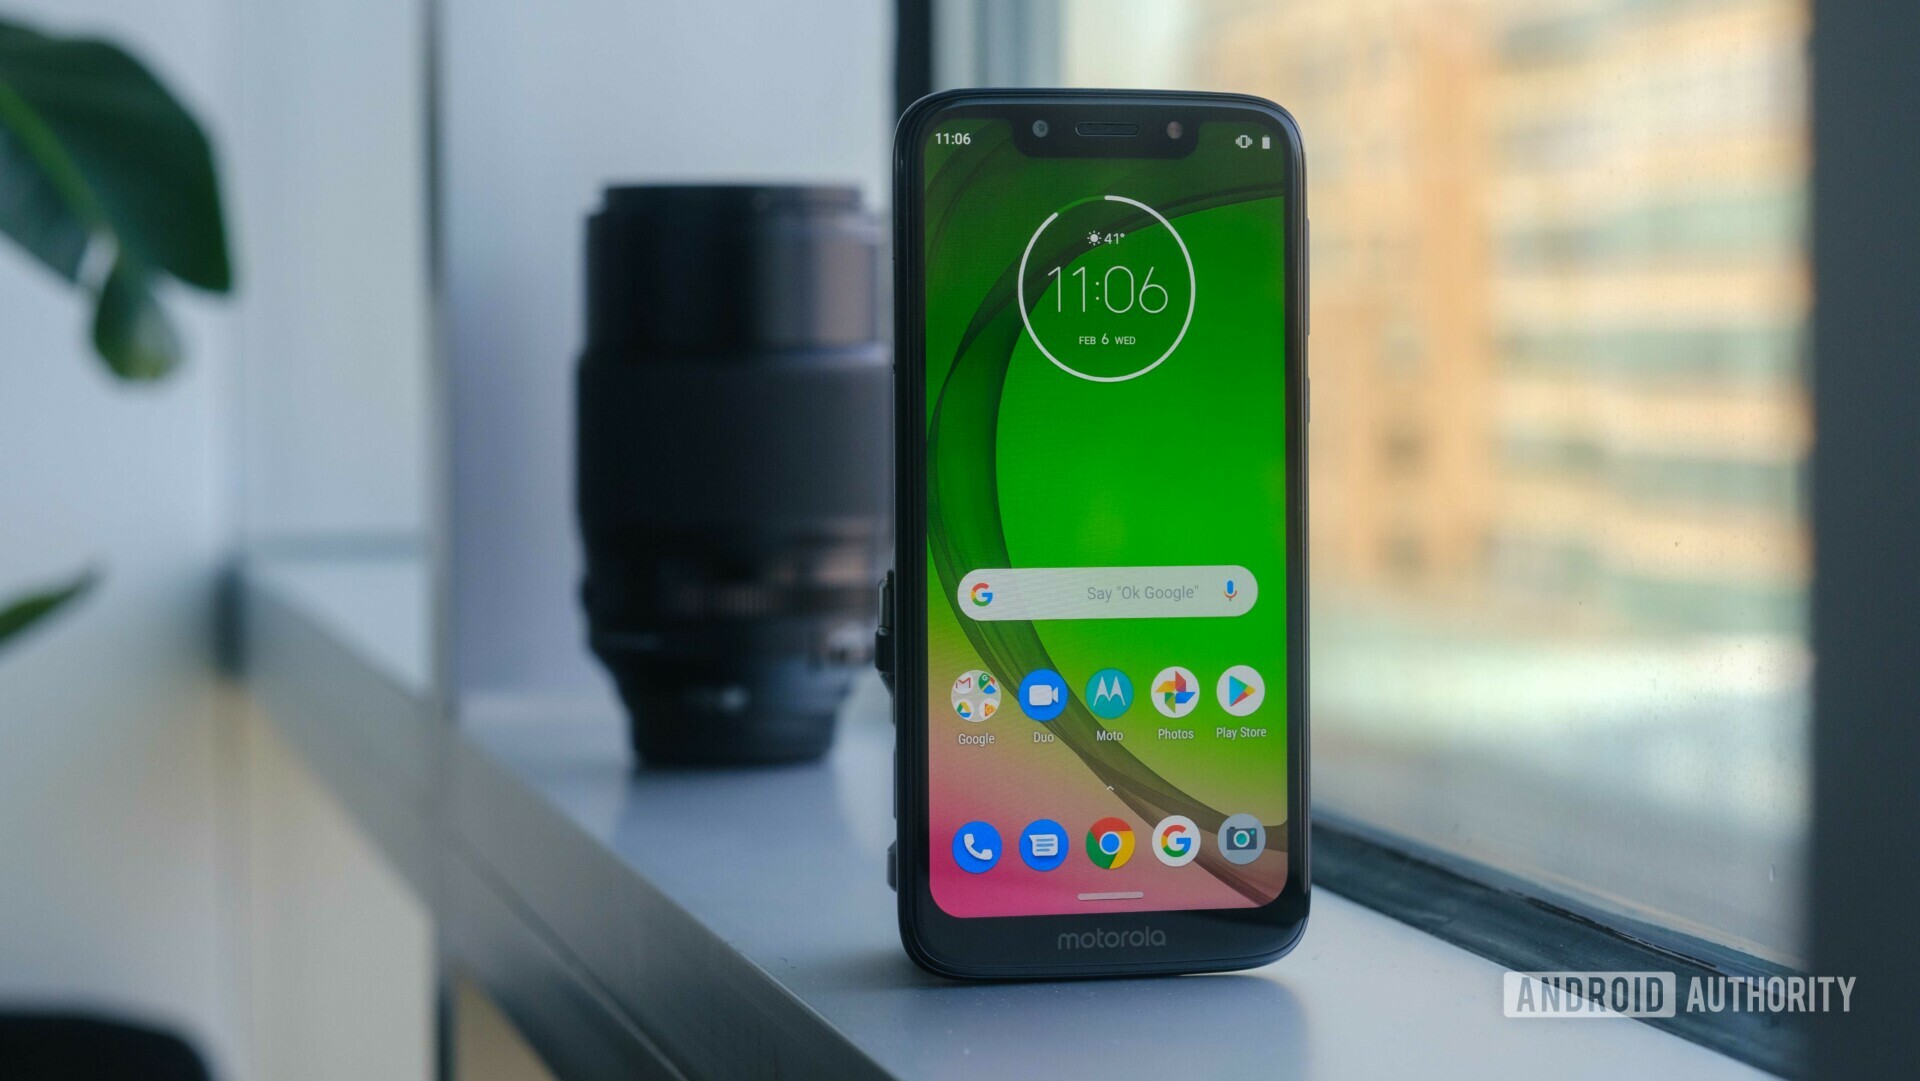 Frontside of the new Motorola Moto G7 Play standing in a upright position next to a window.